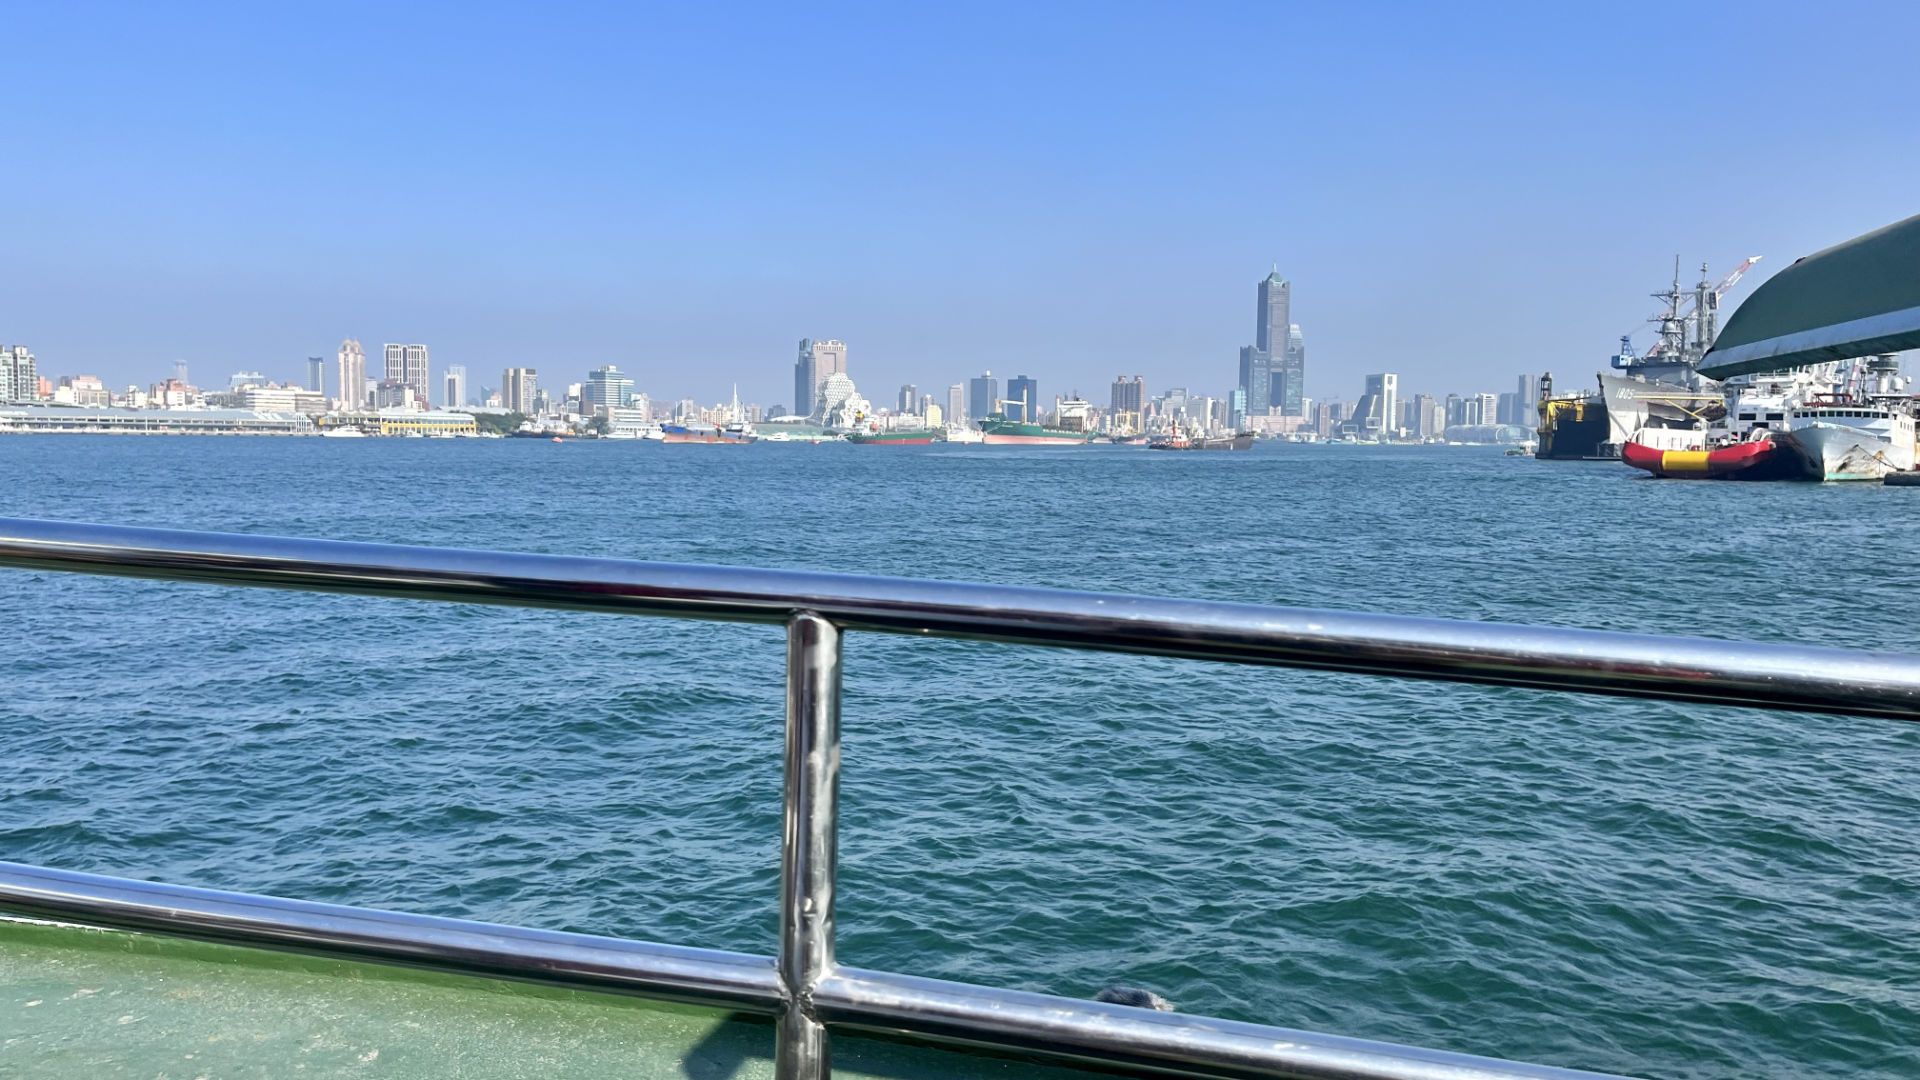 View of Kaohsiung from the top deck of the Cijin Island ferry.